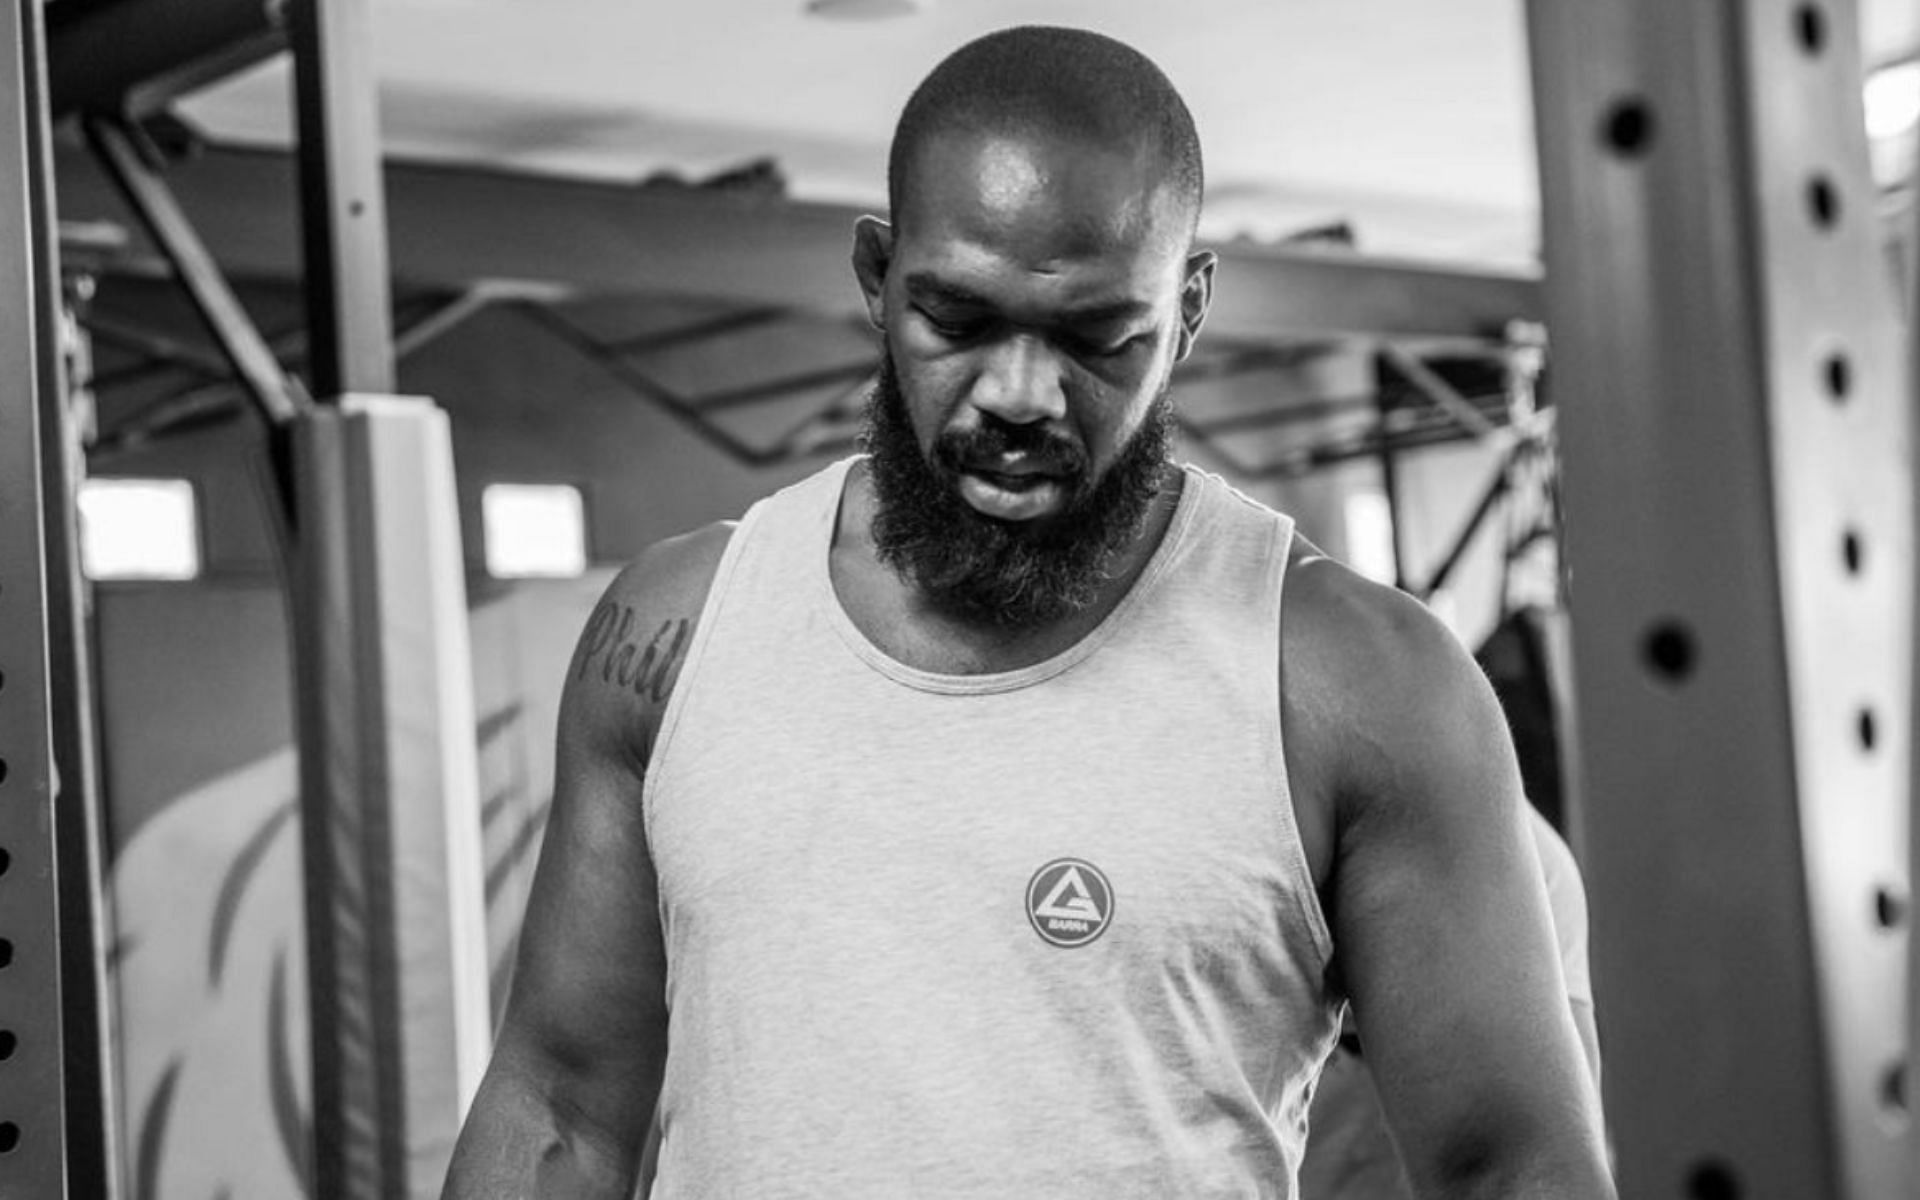 Jon Jones comedically tweeting his weight insecurities while recovering from pectoral surgery [Photo Courtesy @jonnybones on Instagram]